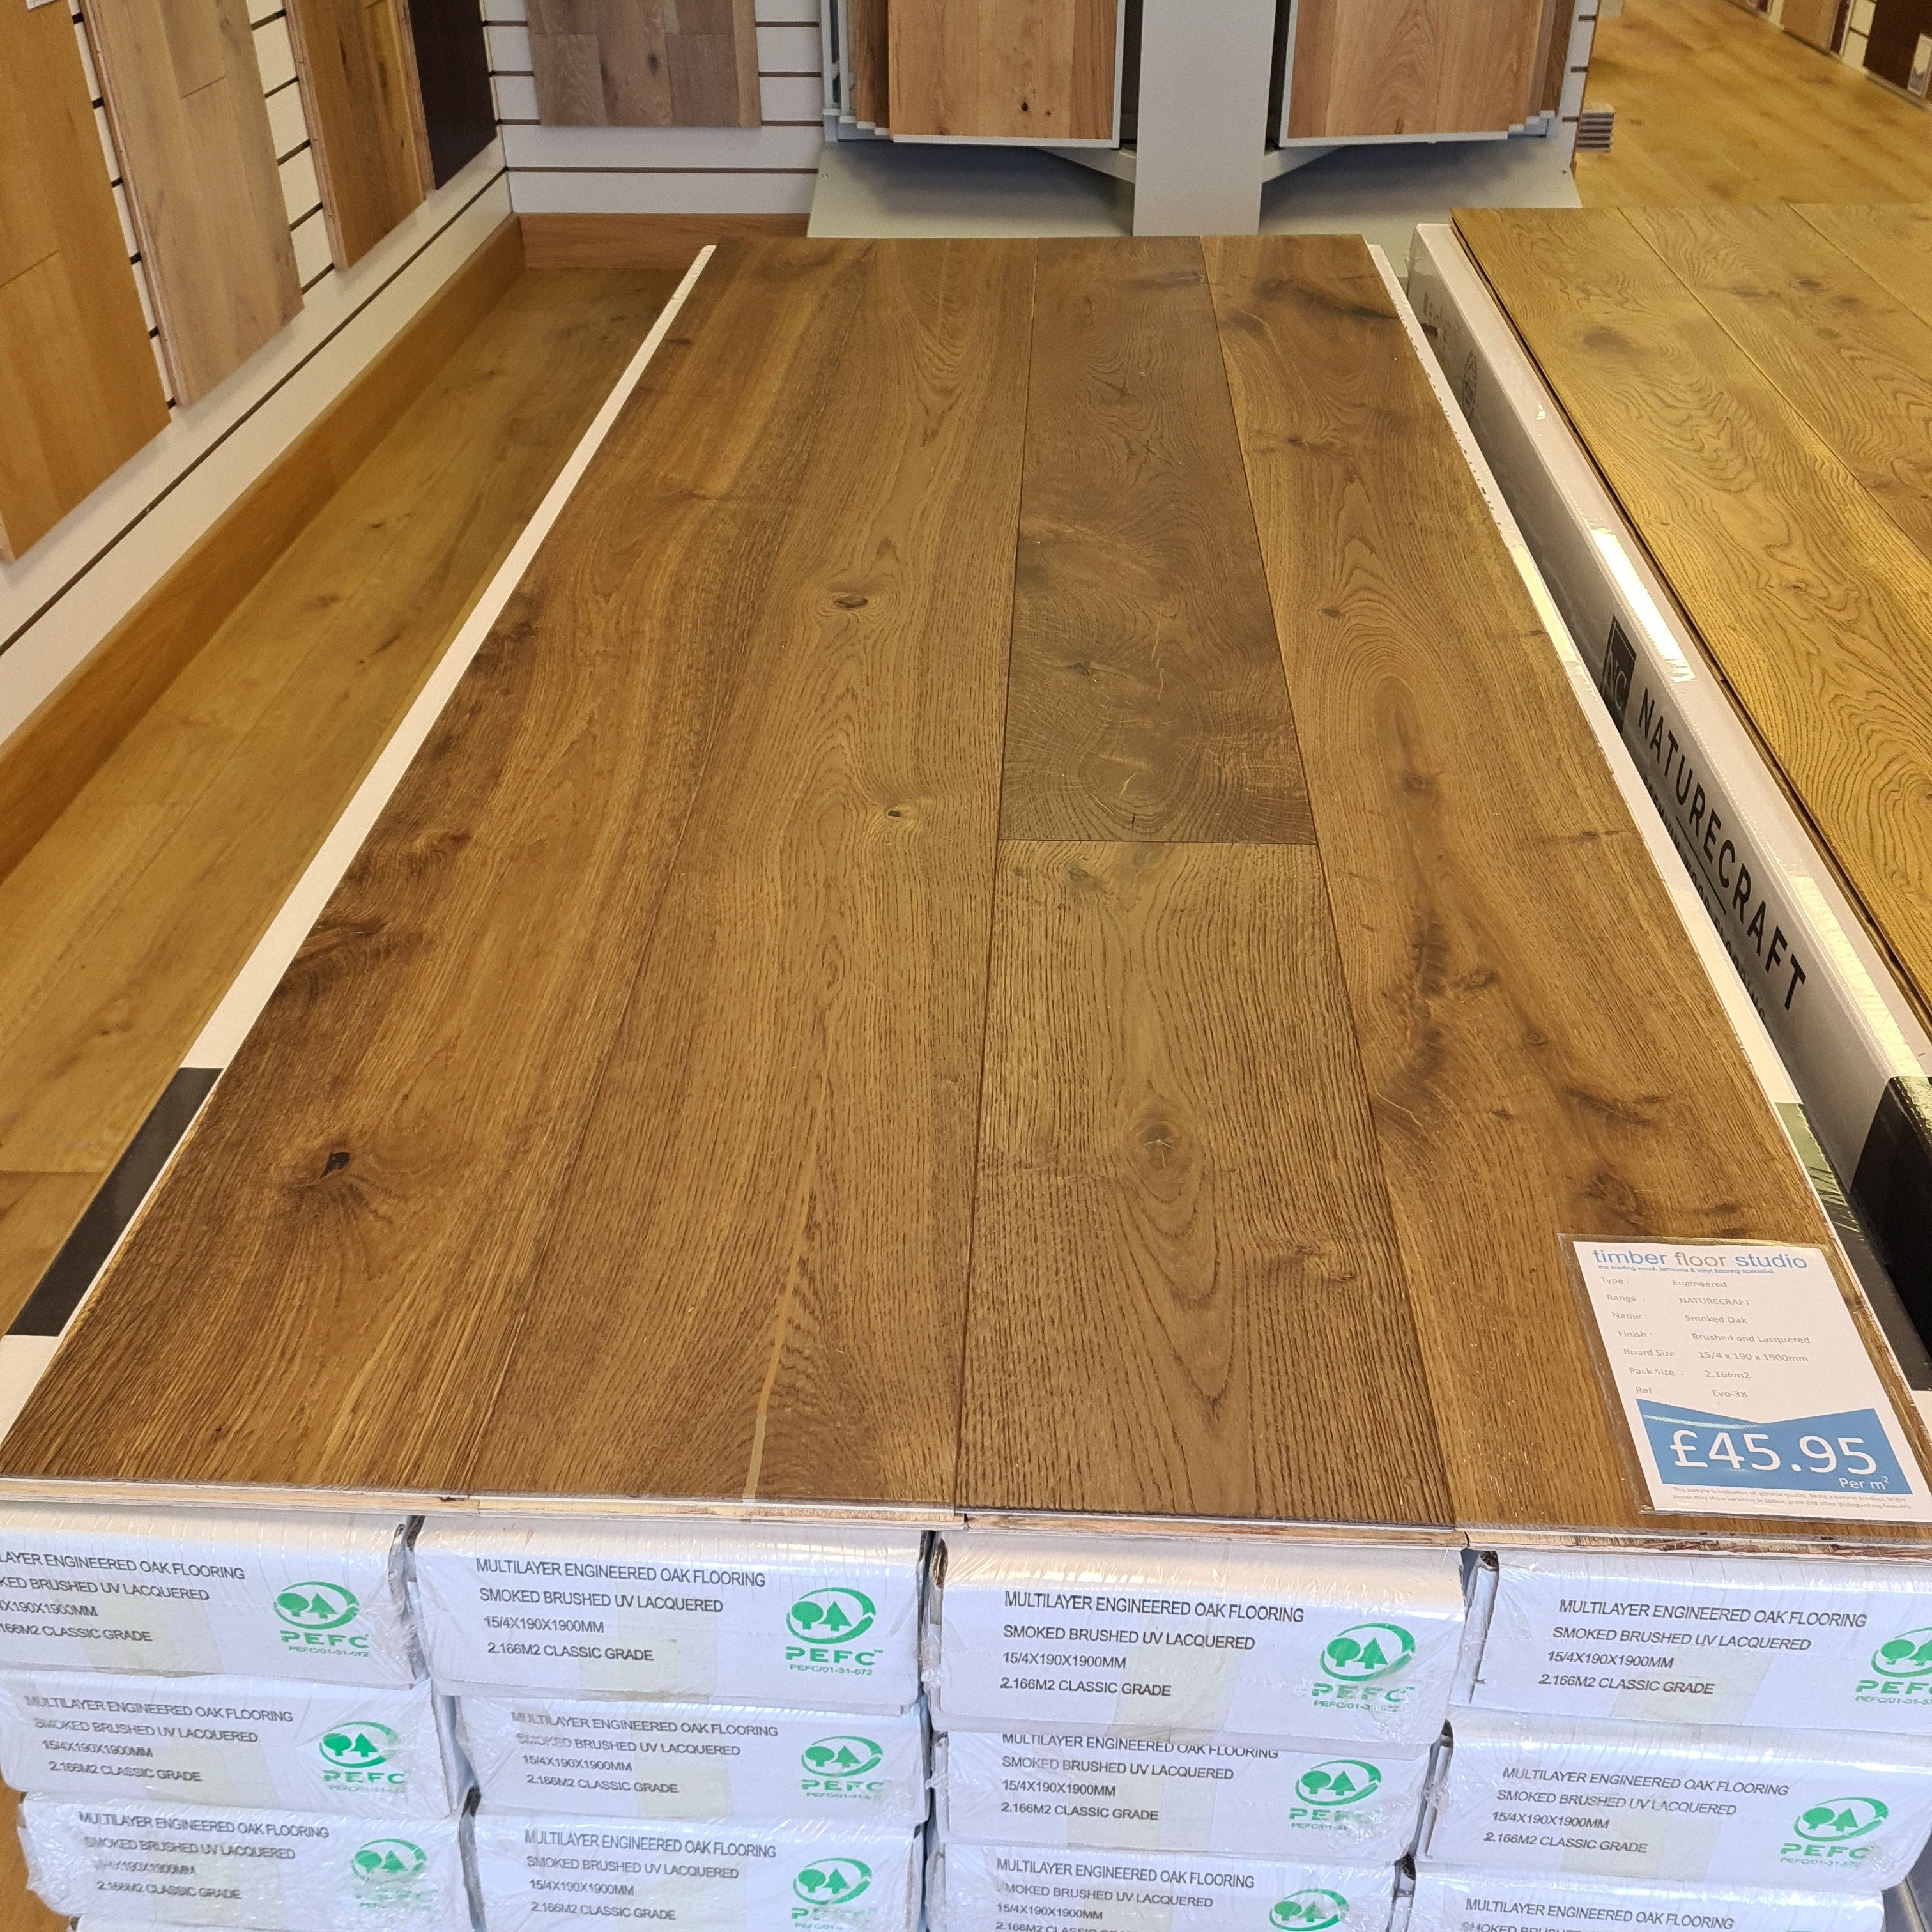 TimberFloor Smoked  Oak Brushed and Lacquered 15/4x190x1900mm Engineered Flooring £49.95m2